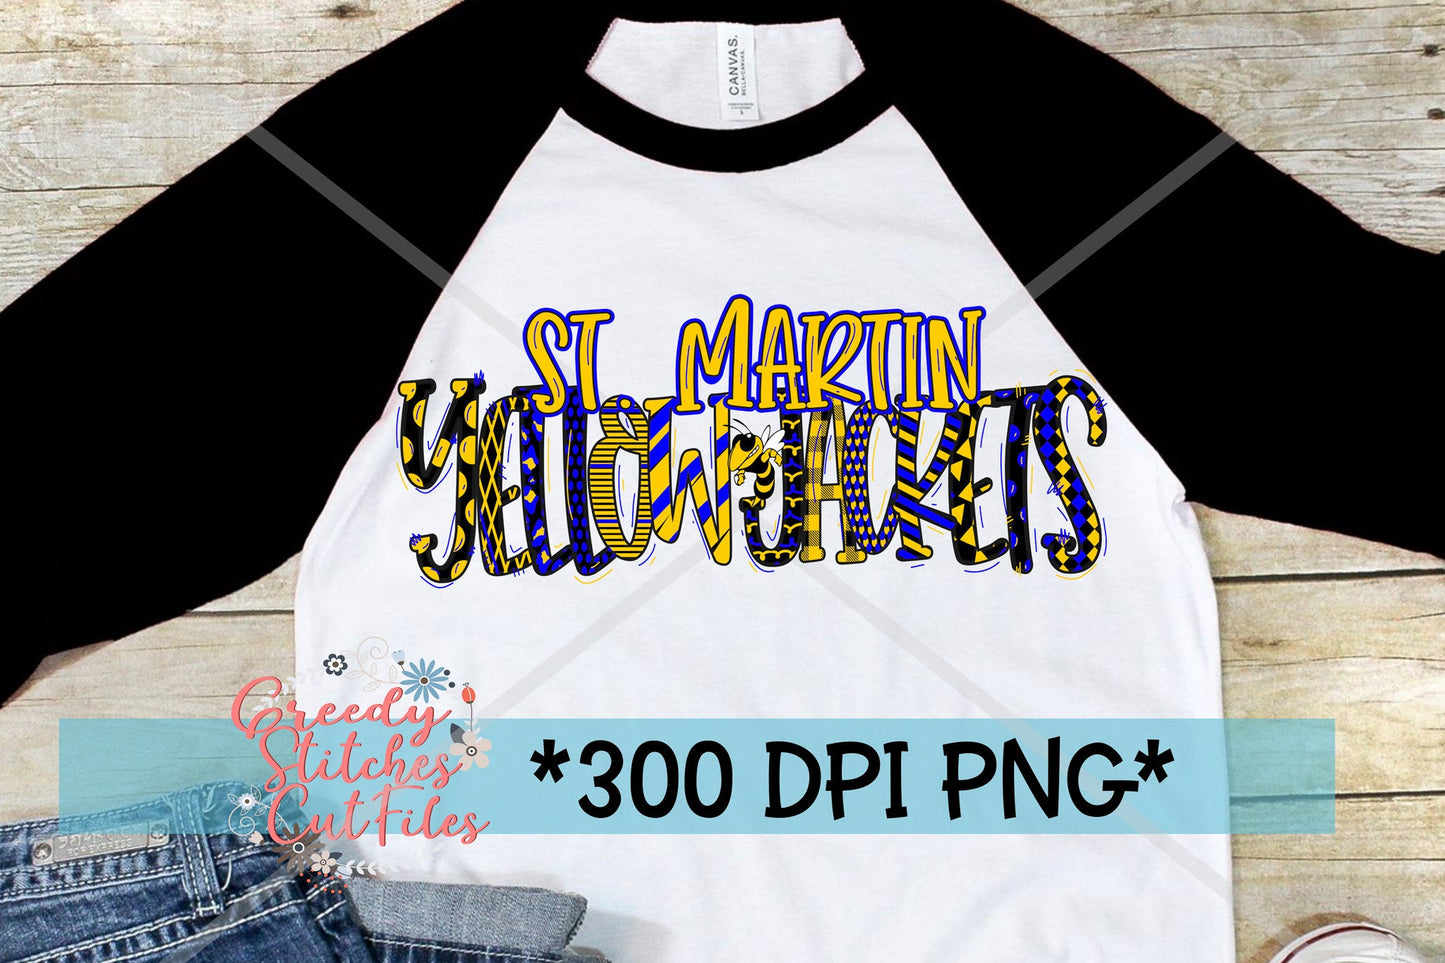 St Martin Yellow Jackets PNG for Sublimation